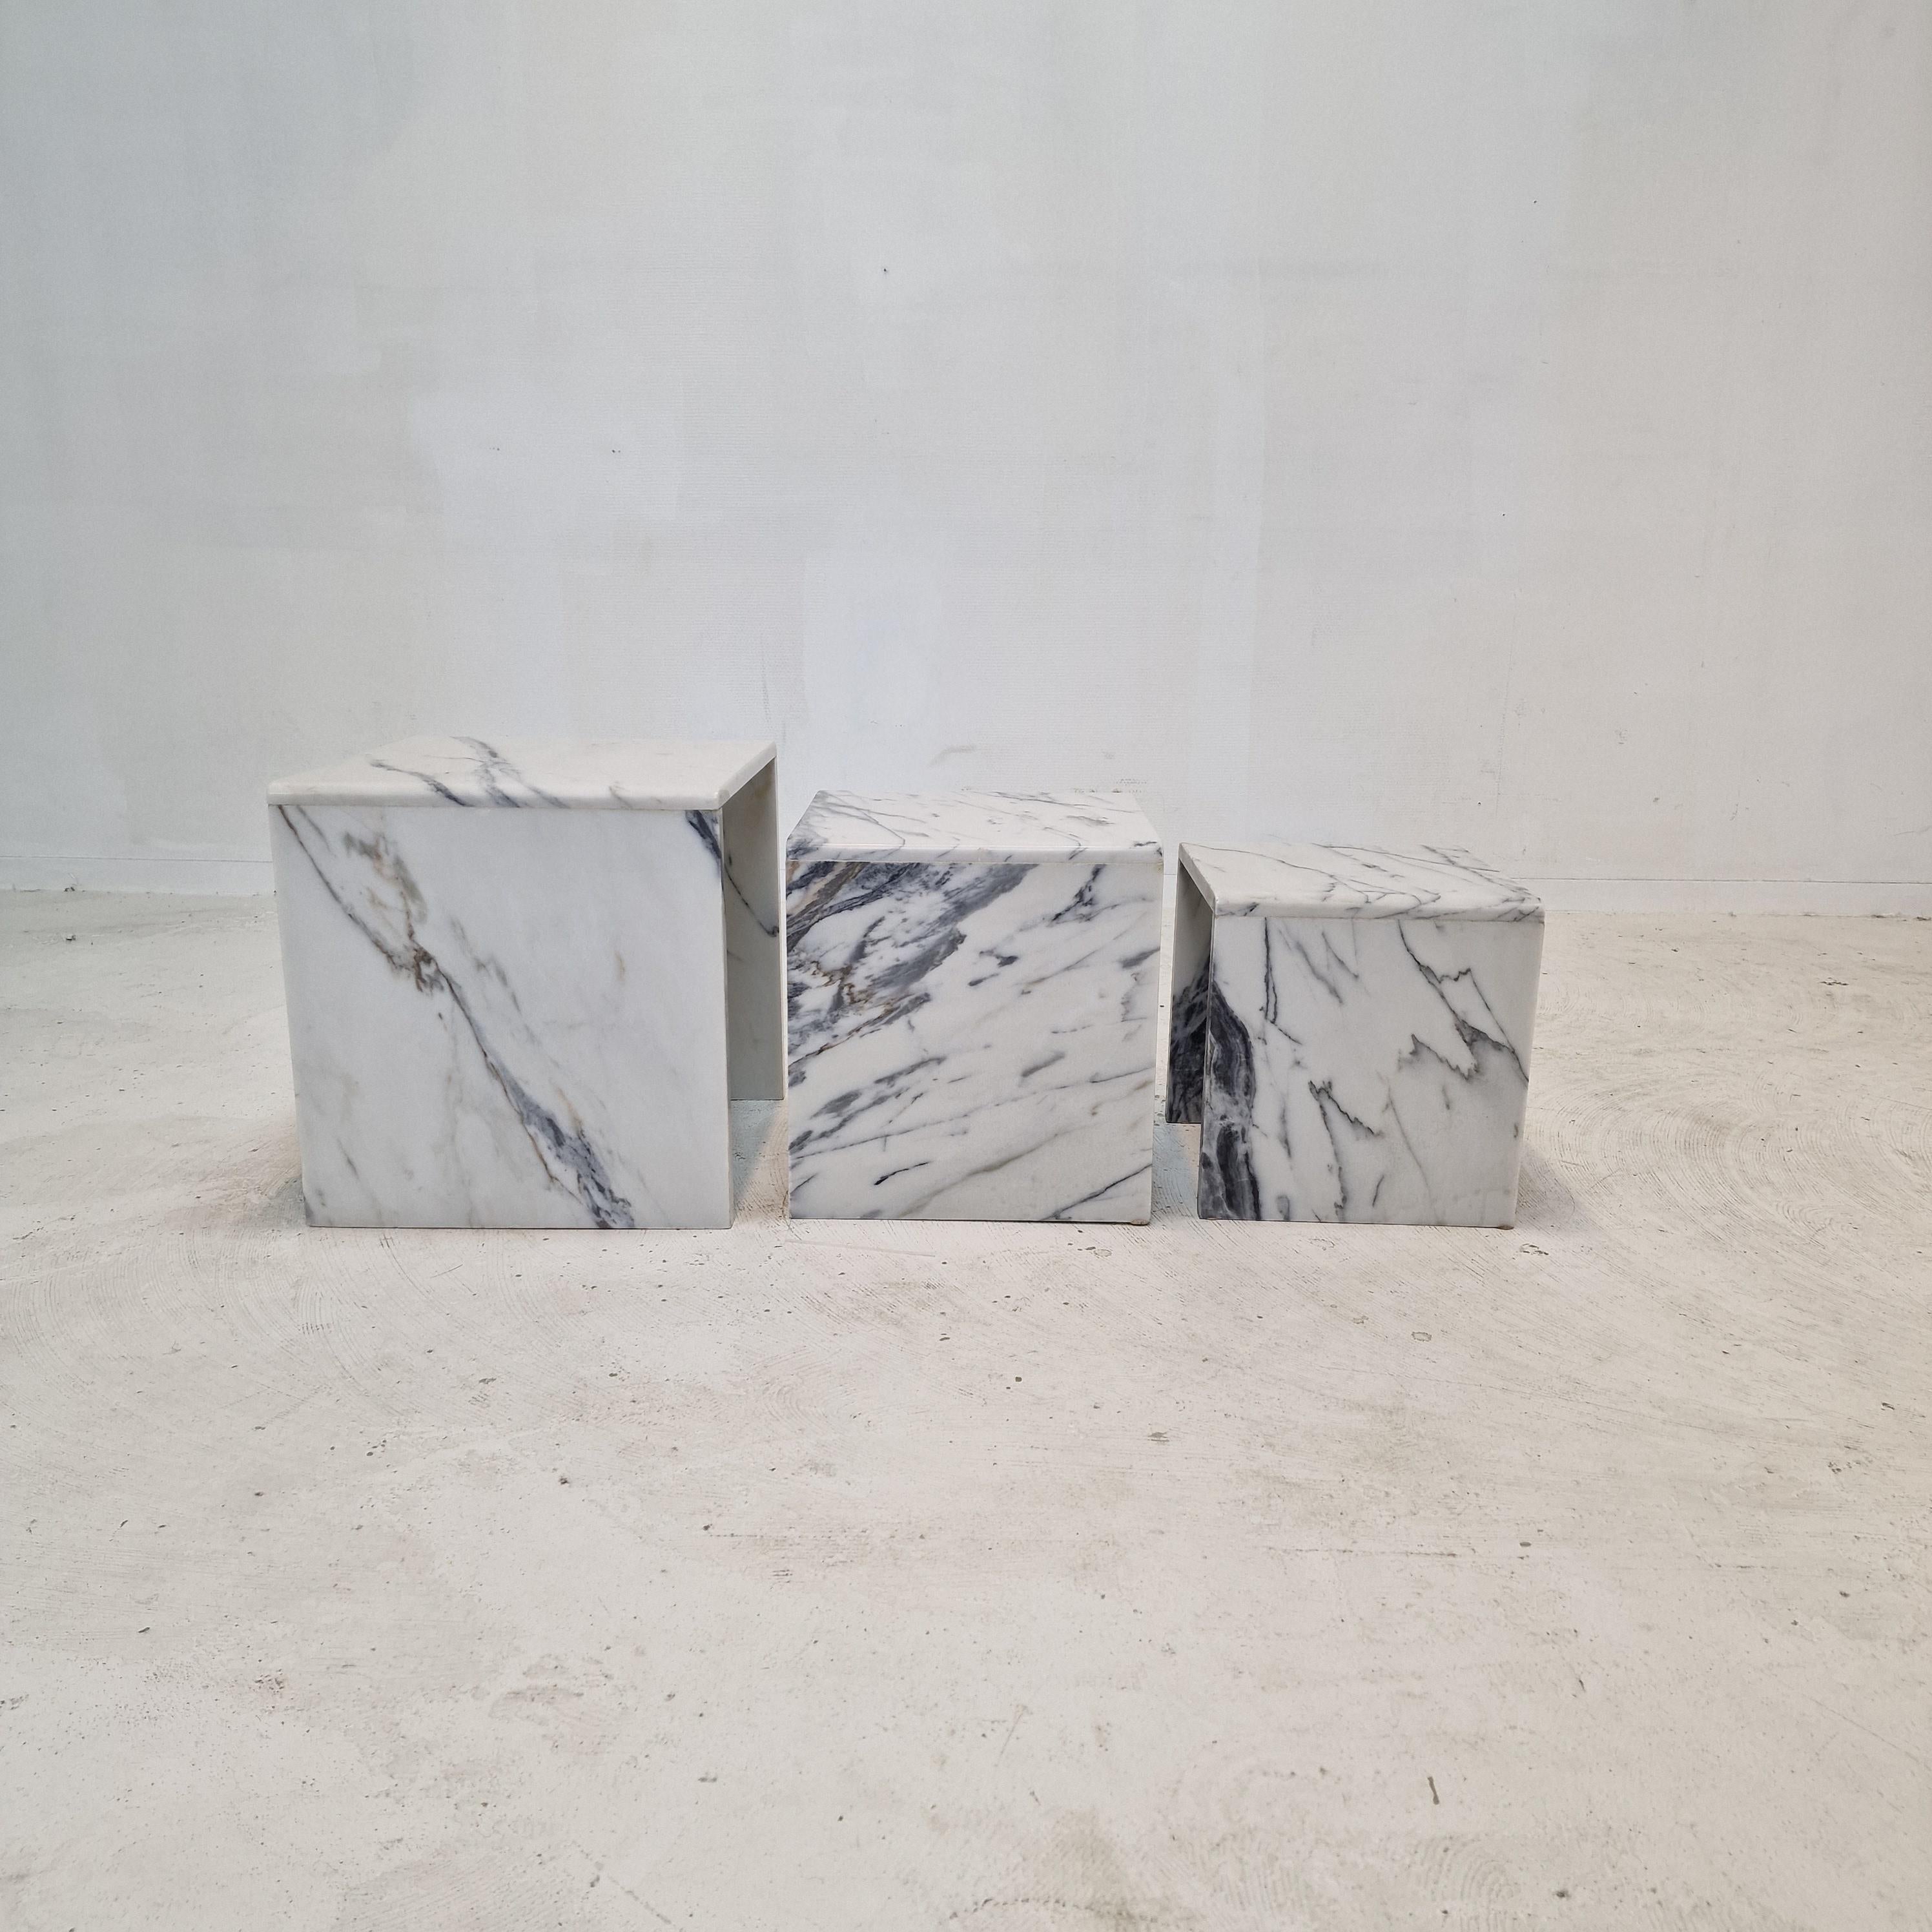 Beautiful set of 3 Italian Coffee or Nesting Tables, 1980s.

The tables have all a different size so they fit in each other.

This amazing set is handcrafted out of stunning Carrara Marble.
Please take notice of the very nice patterns. 

The tables